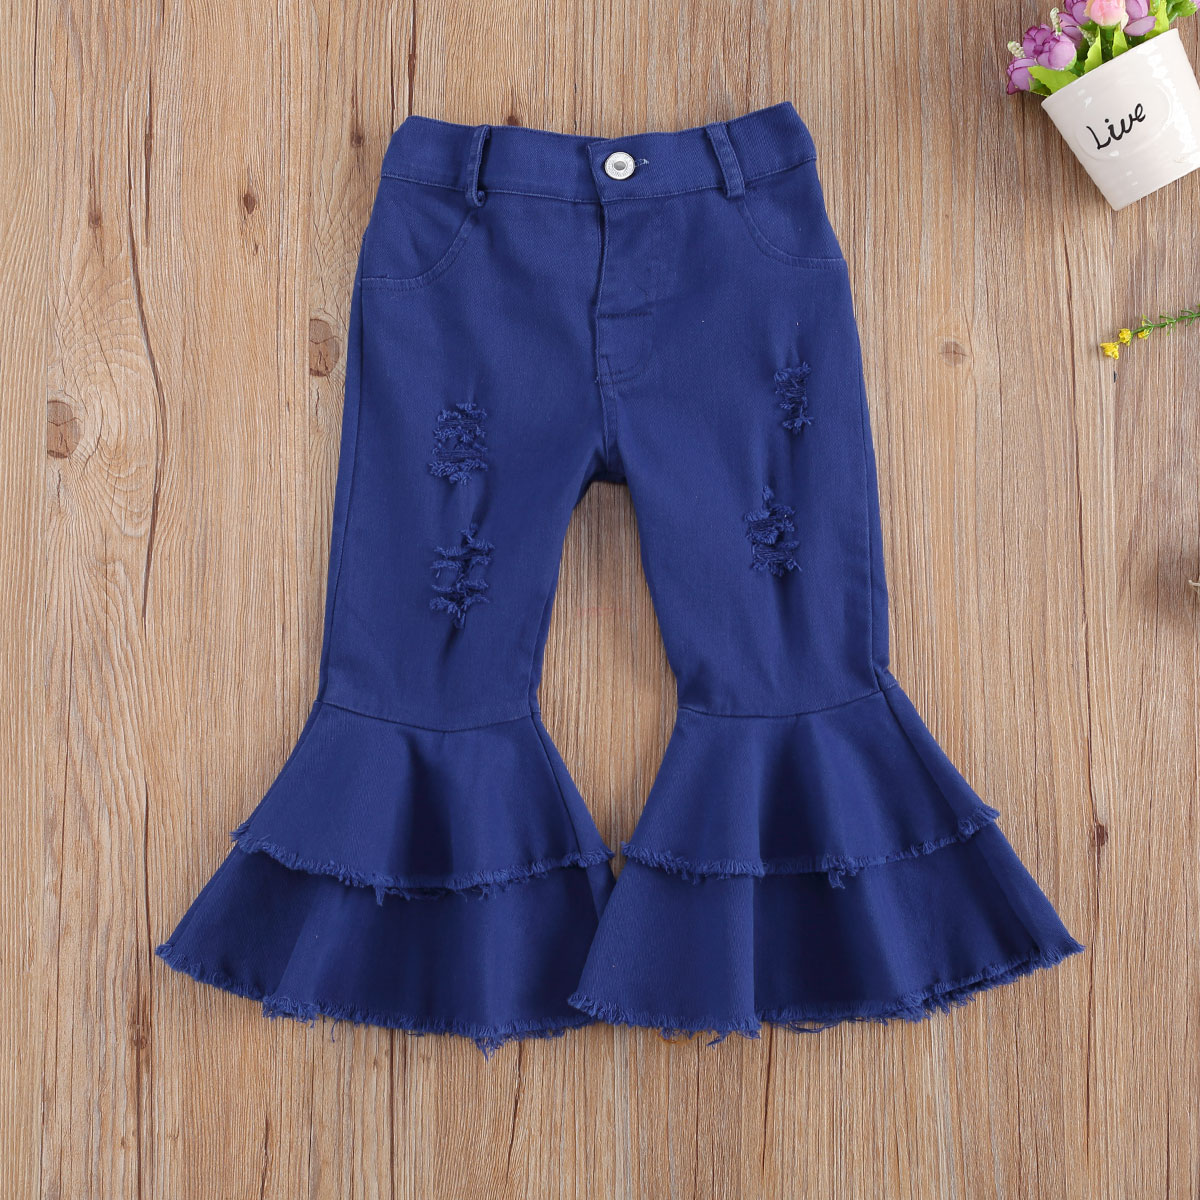 2-6Years Kids Girls Jeans Flare Pants Solid Elastic Waist Button Denim Hole Trousers Pants 5 Colors